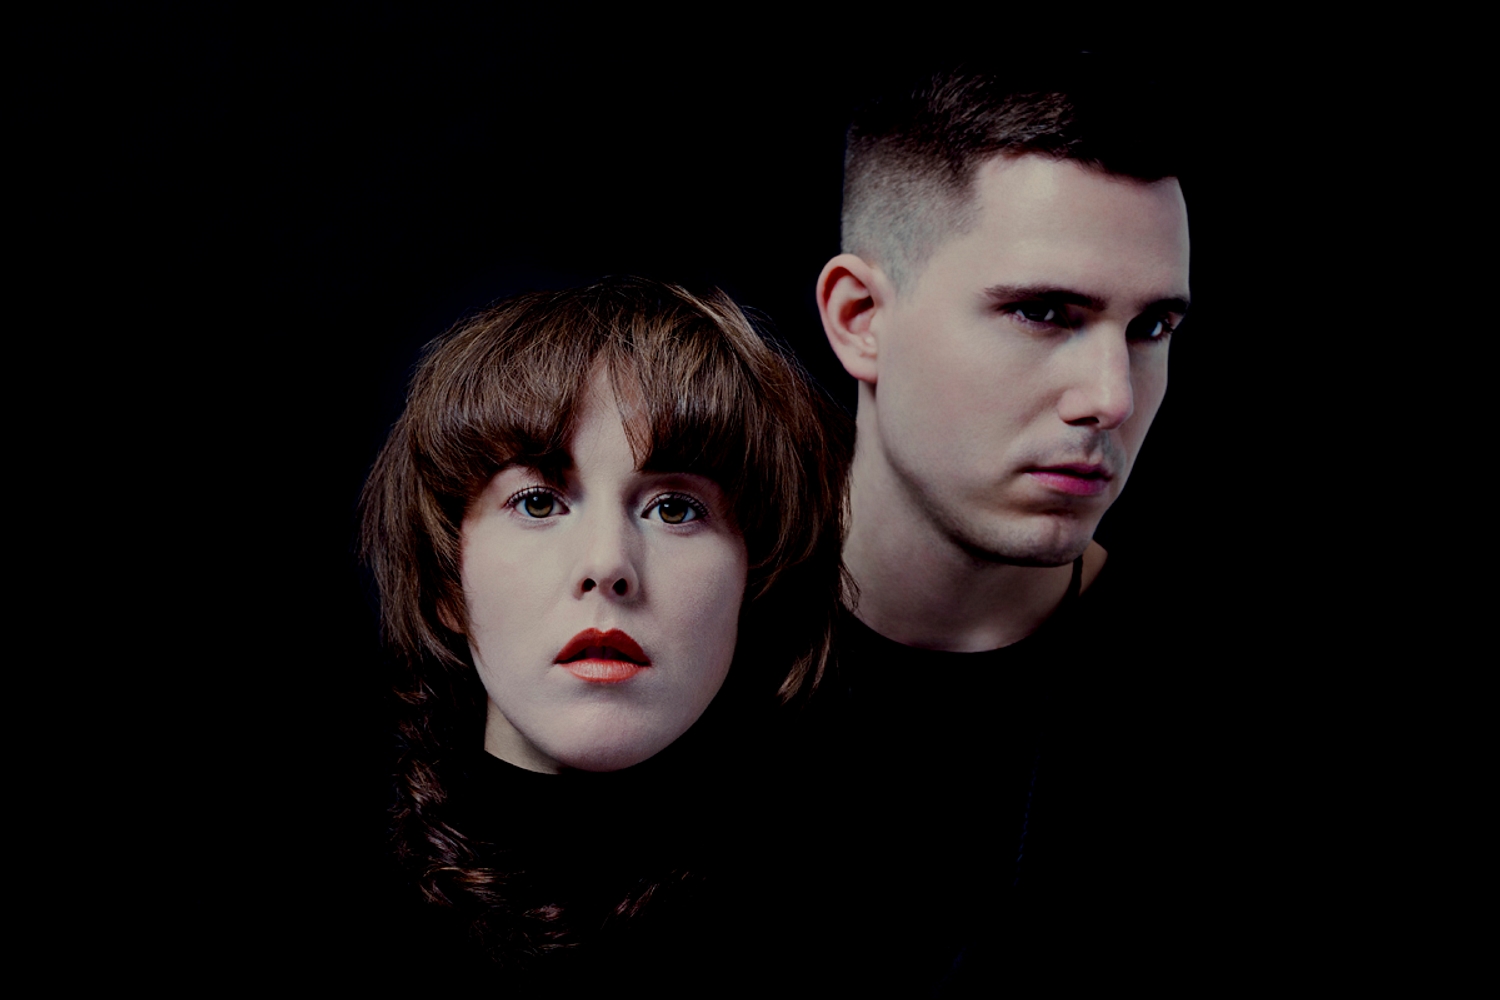 Purity Ring share lyrics in full for ‘Another Eternity’ LP